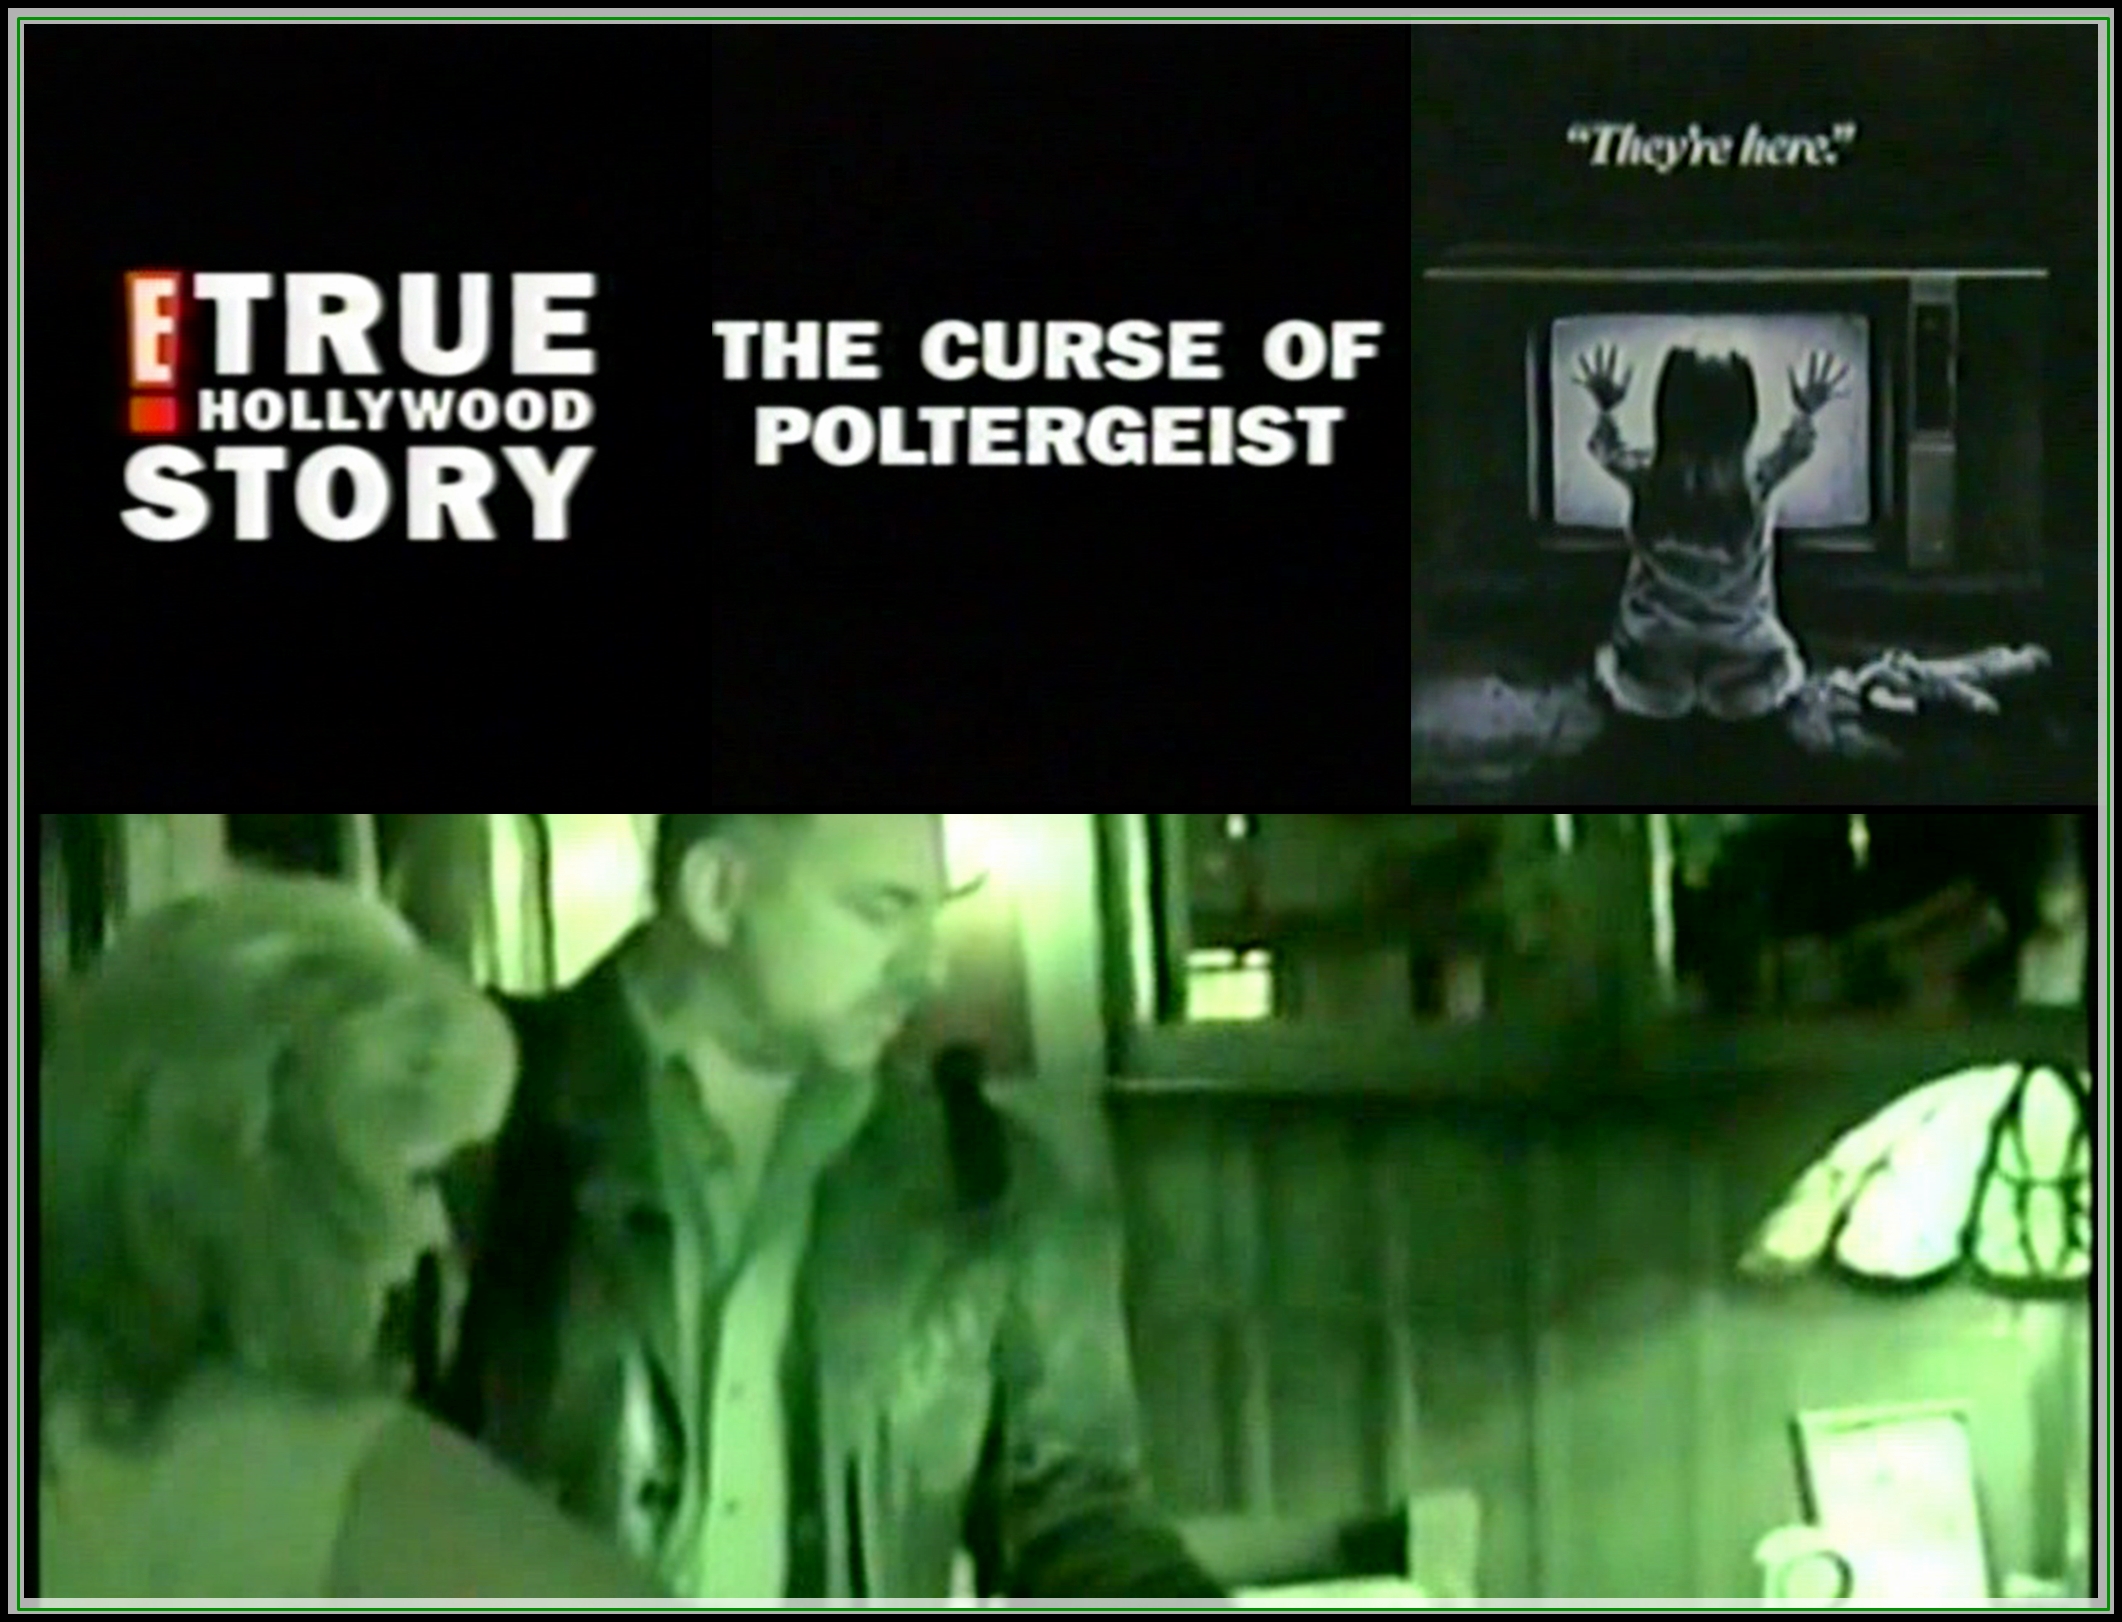 Archived footage of an ISPR parapsychological investigation on E! TRUE HOLLYWOOD STORY - THE CURSE OF POLTERGEIST (2002). L-R: Abigail, Larry Montz